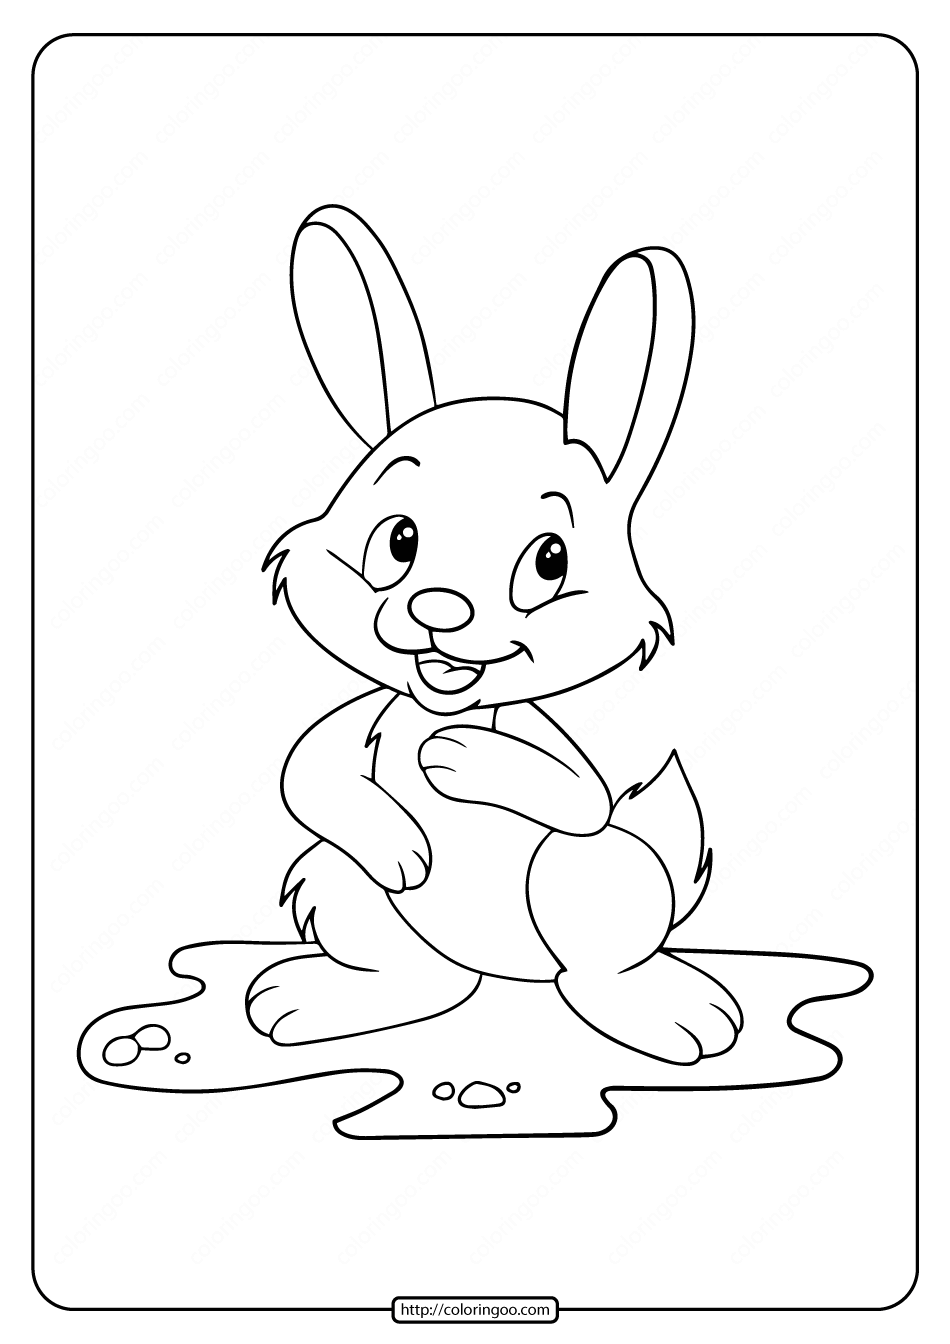 free printable rabbit coloring page for kids